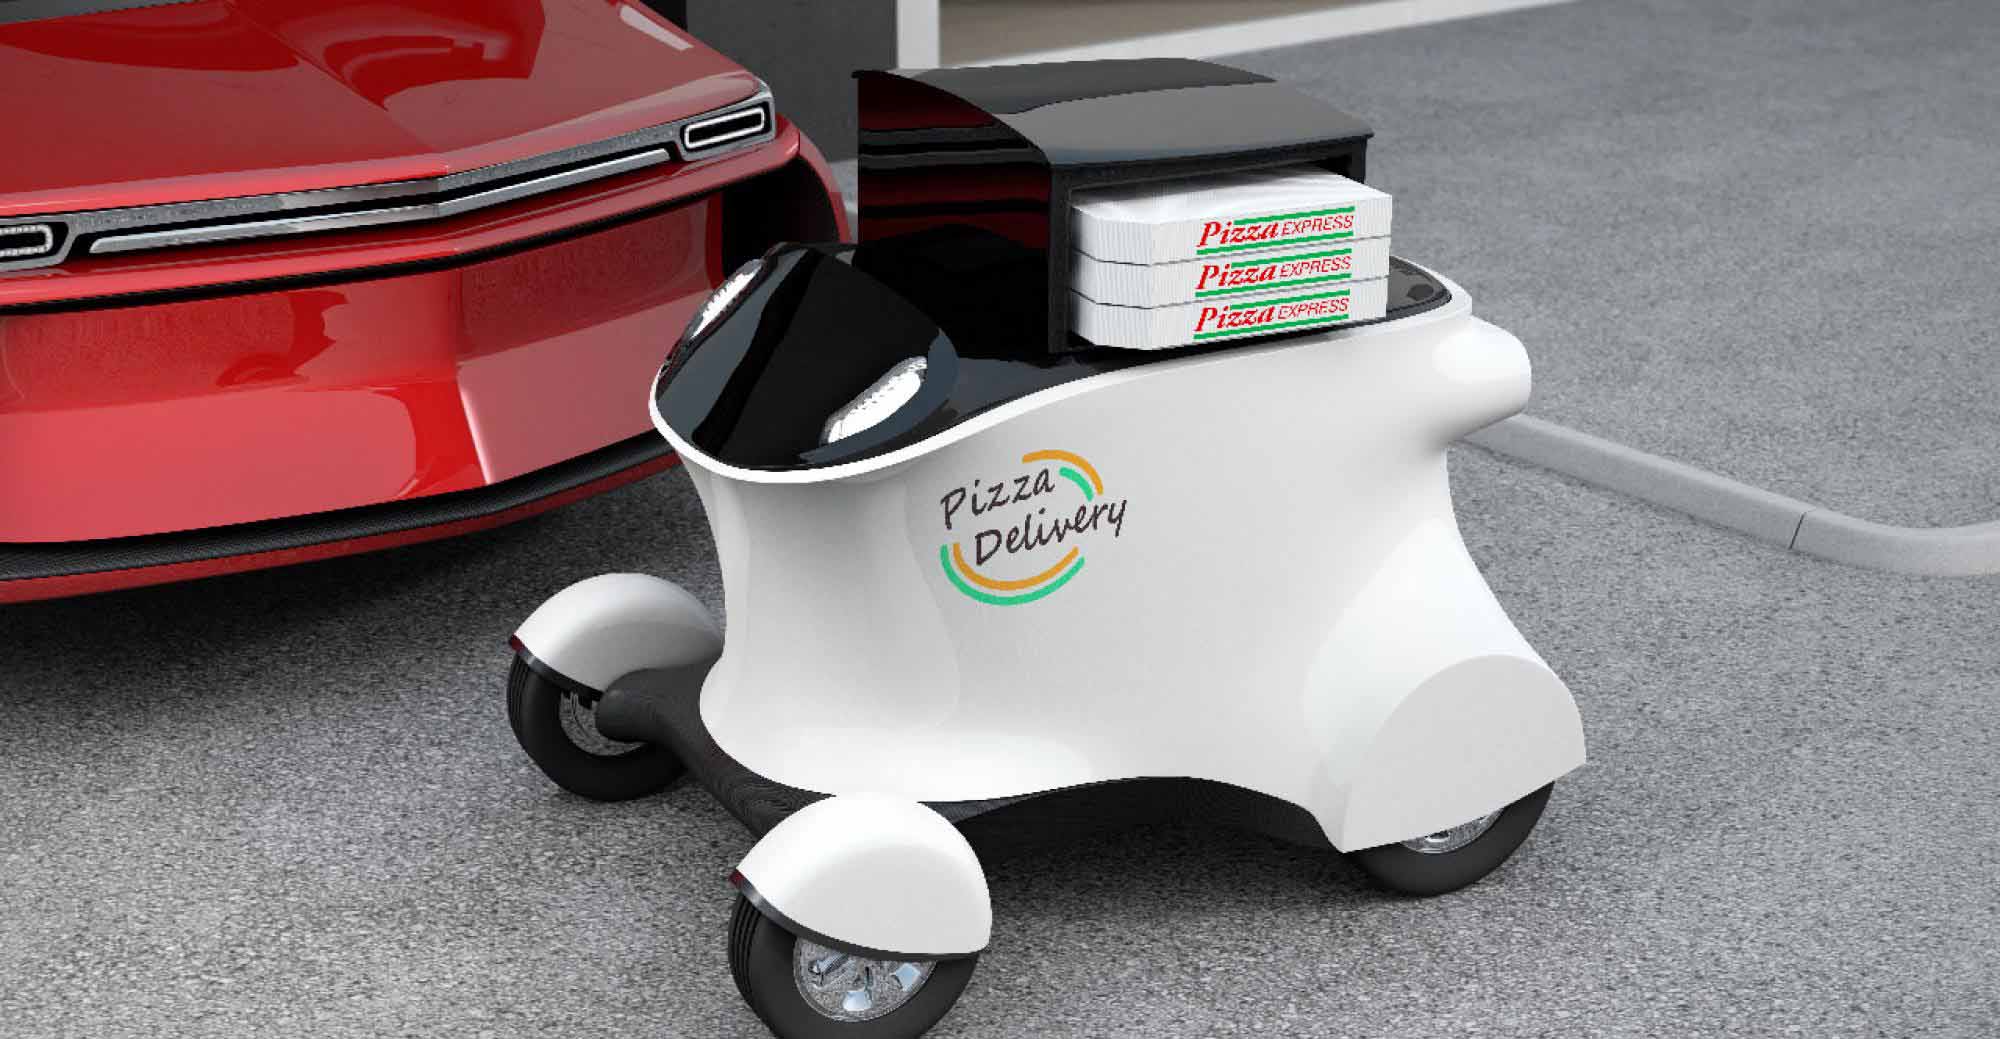 5 coronavirus things: Meal delivery robots help minimize COVID spread at University of Wisconsin